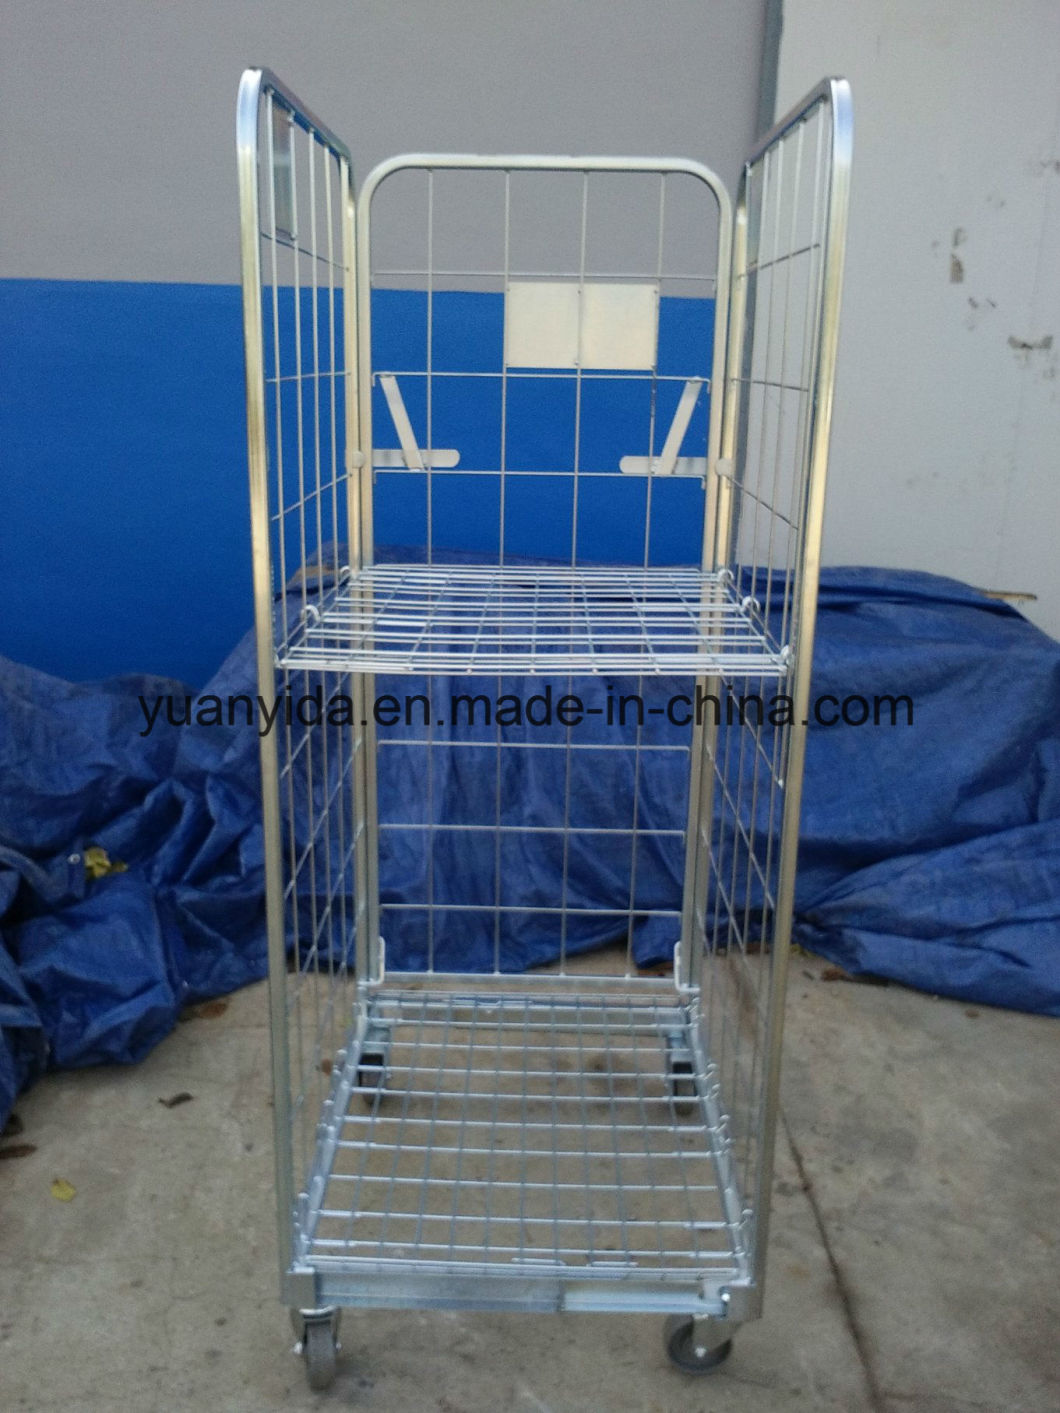 2017 Europe Foldable Mesh Roll Pallet Roll Container